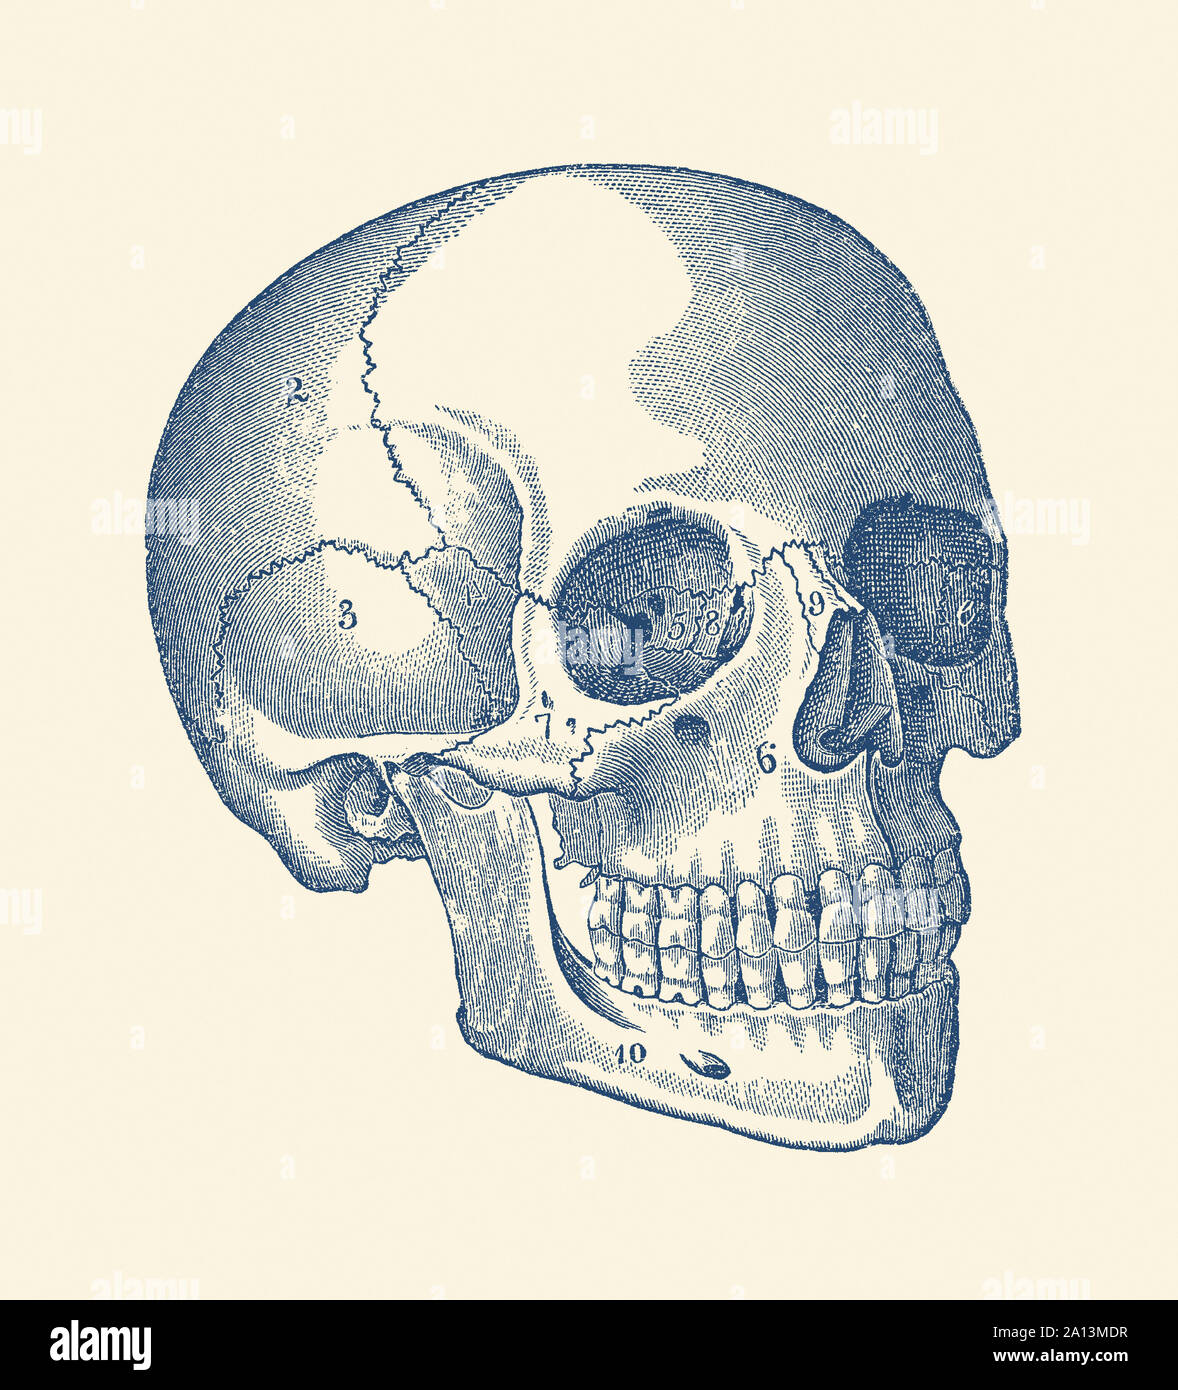 Vintage anatomy print features the skull of a human skeleton with each bone labeled. Stock Photo